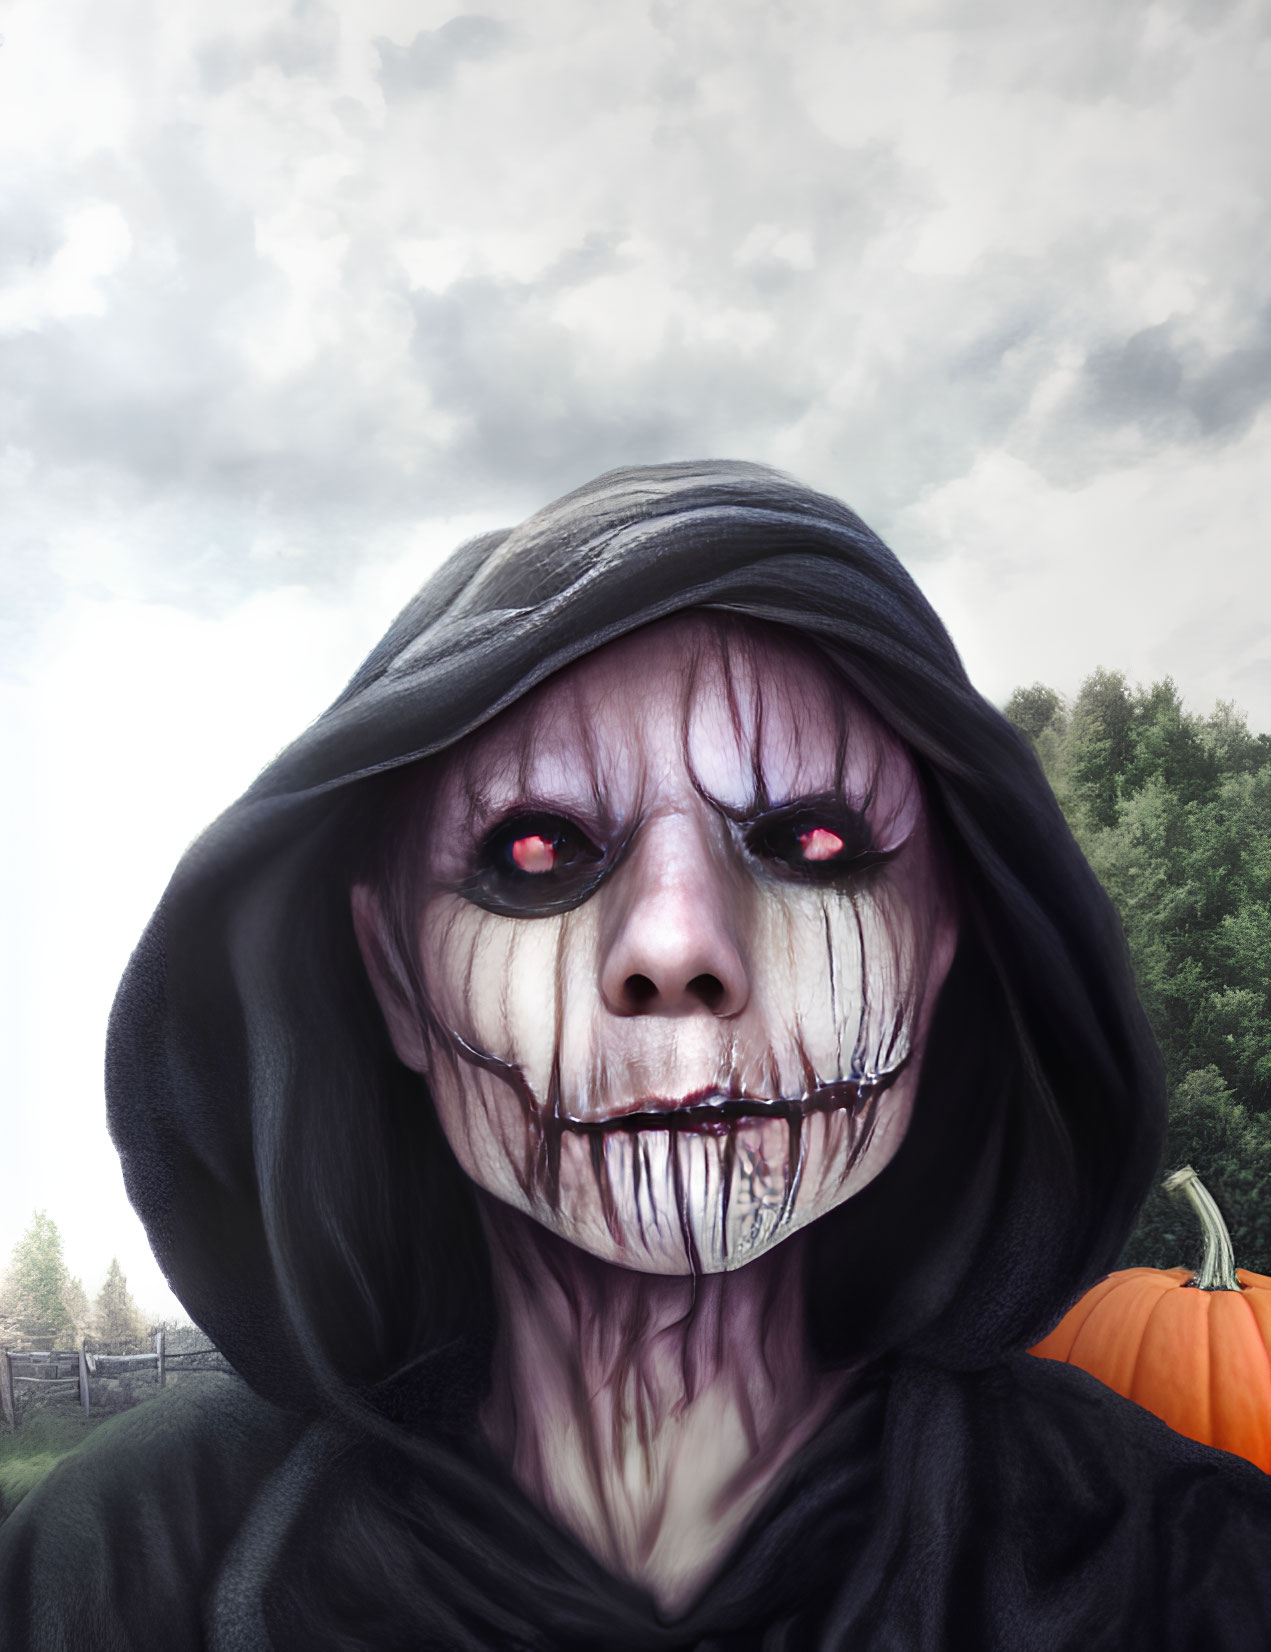 Hooded figure with skull face paint and red eyes